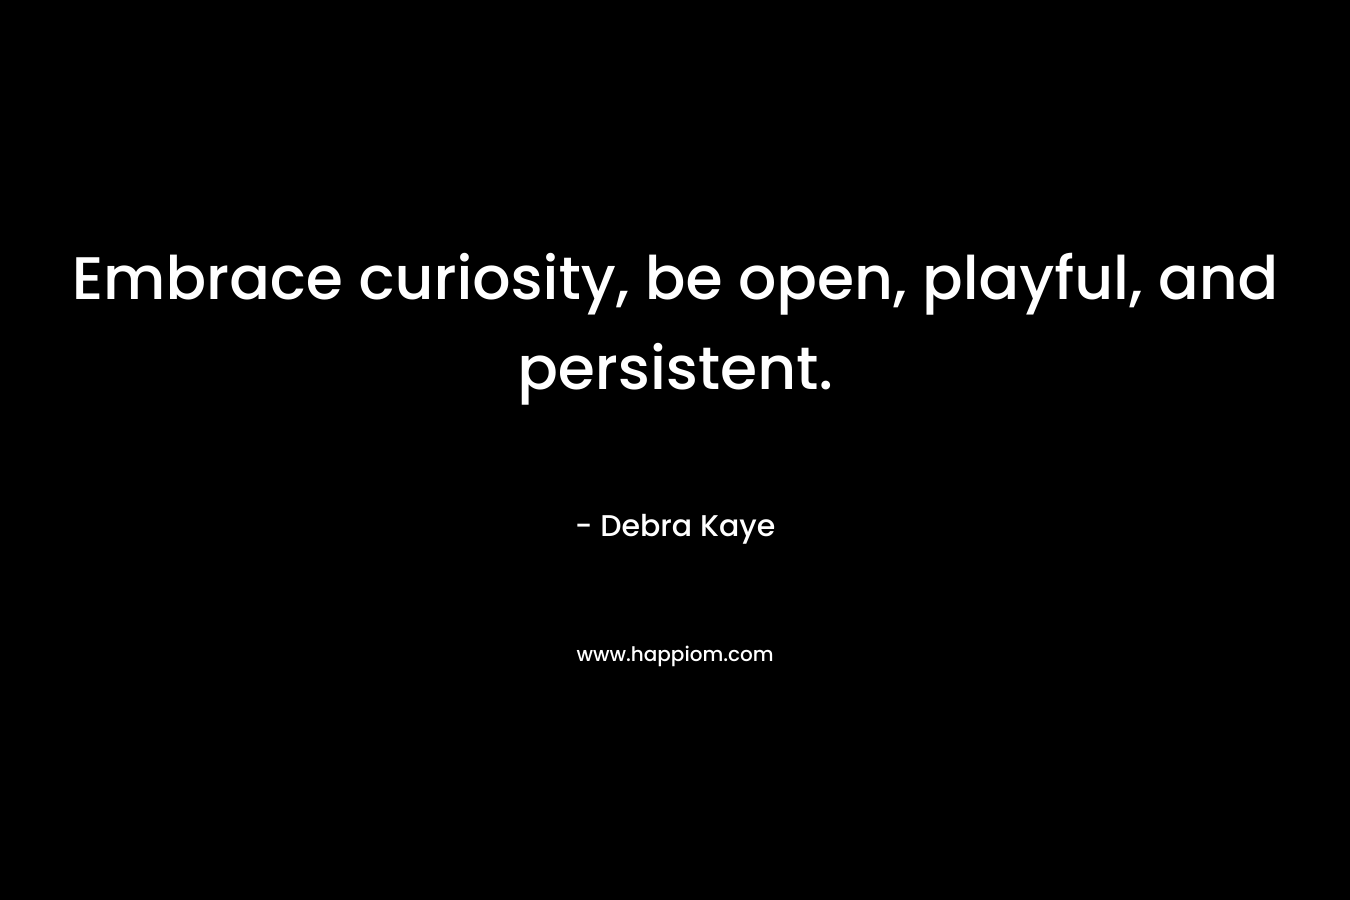 Embrace curiosity, be open, playful, and persistent.